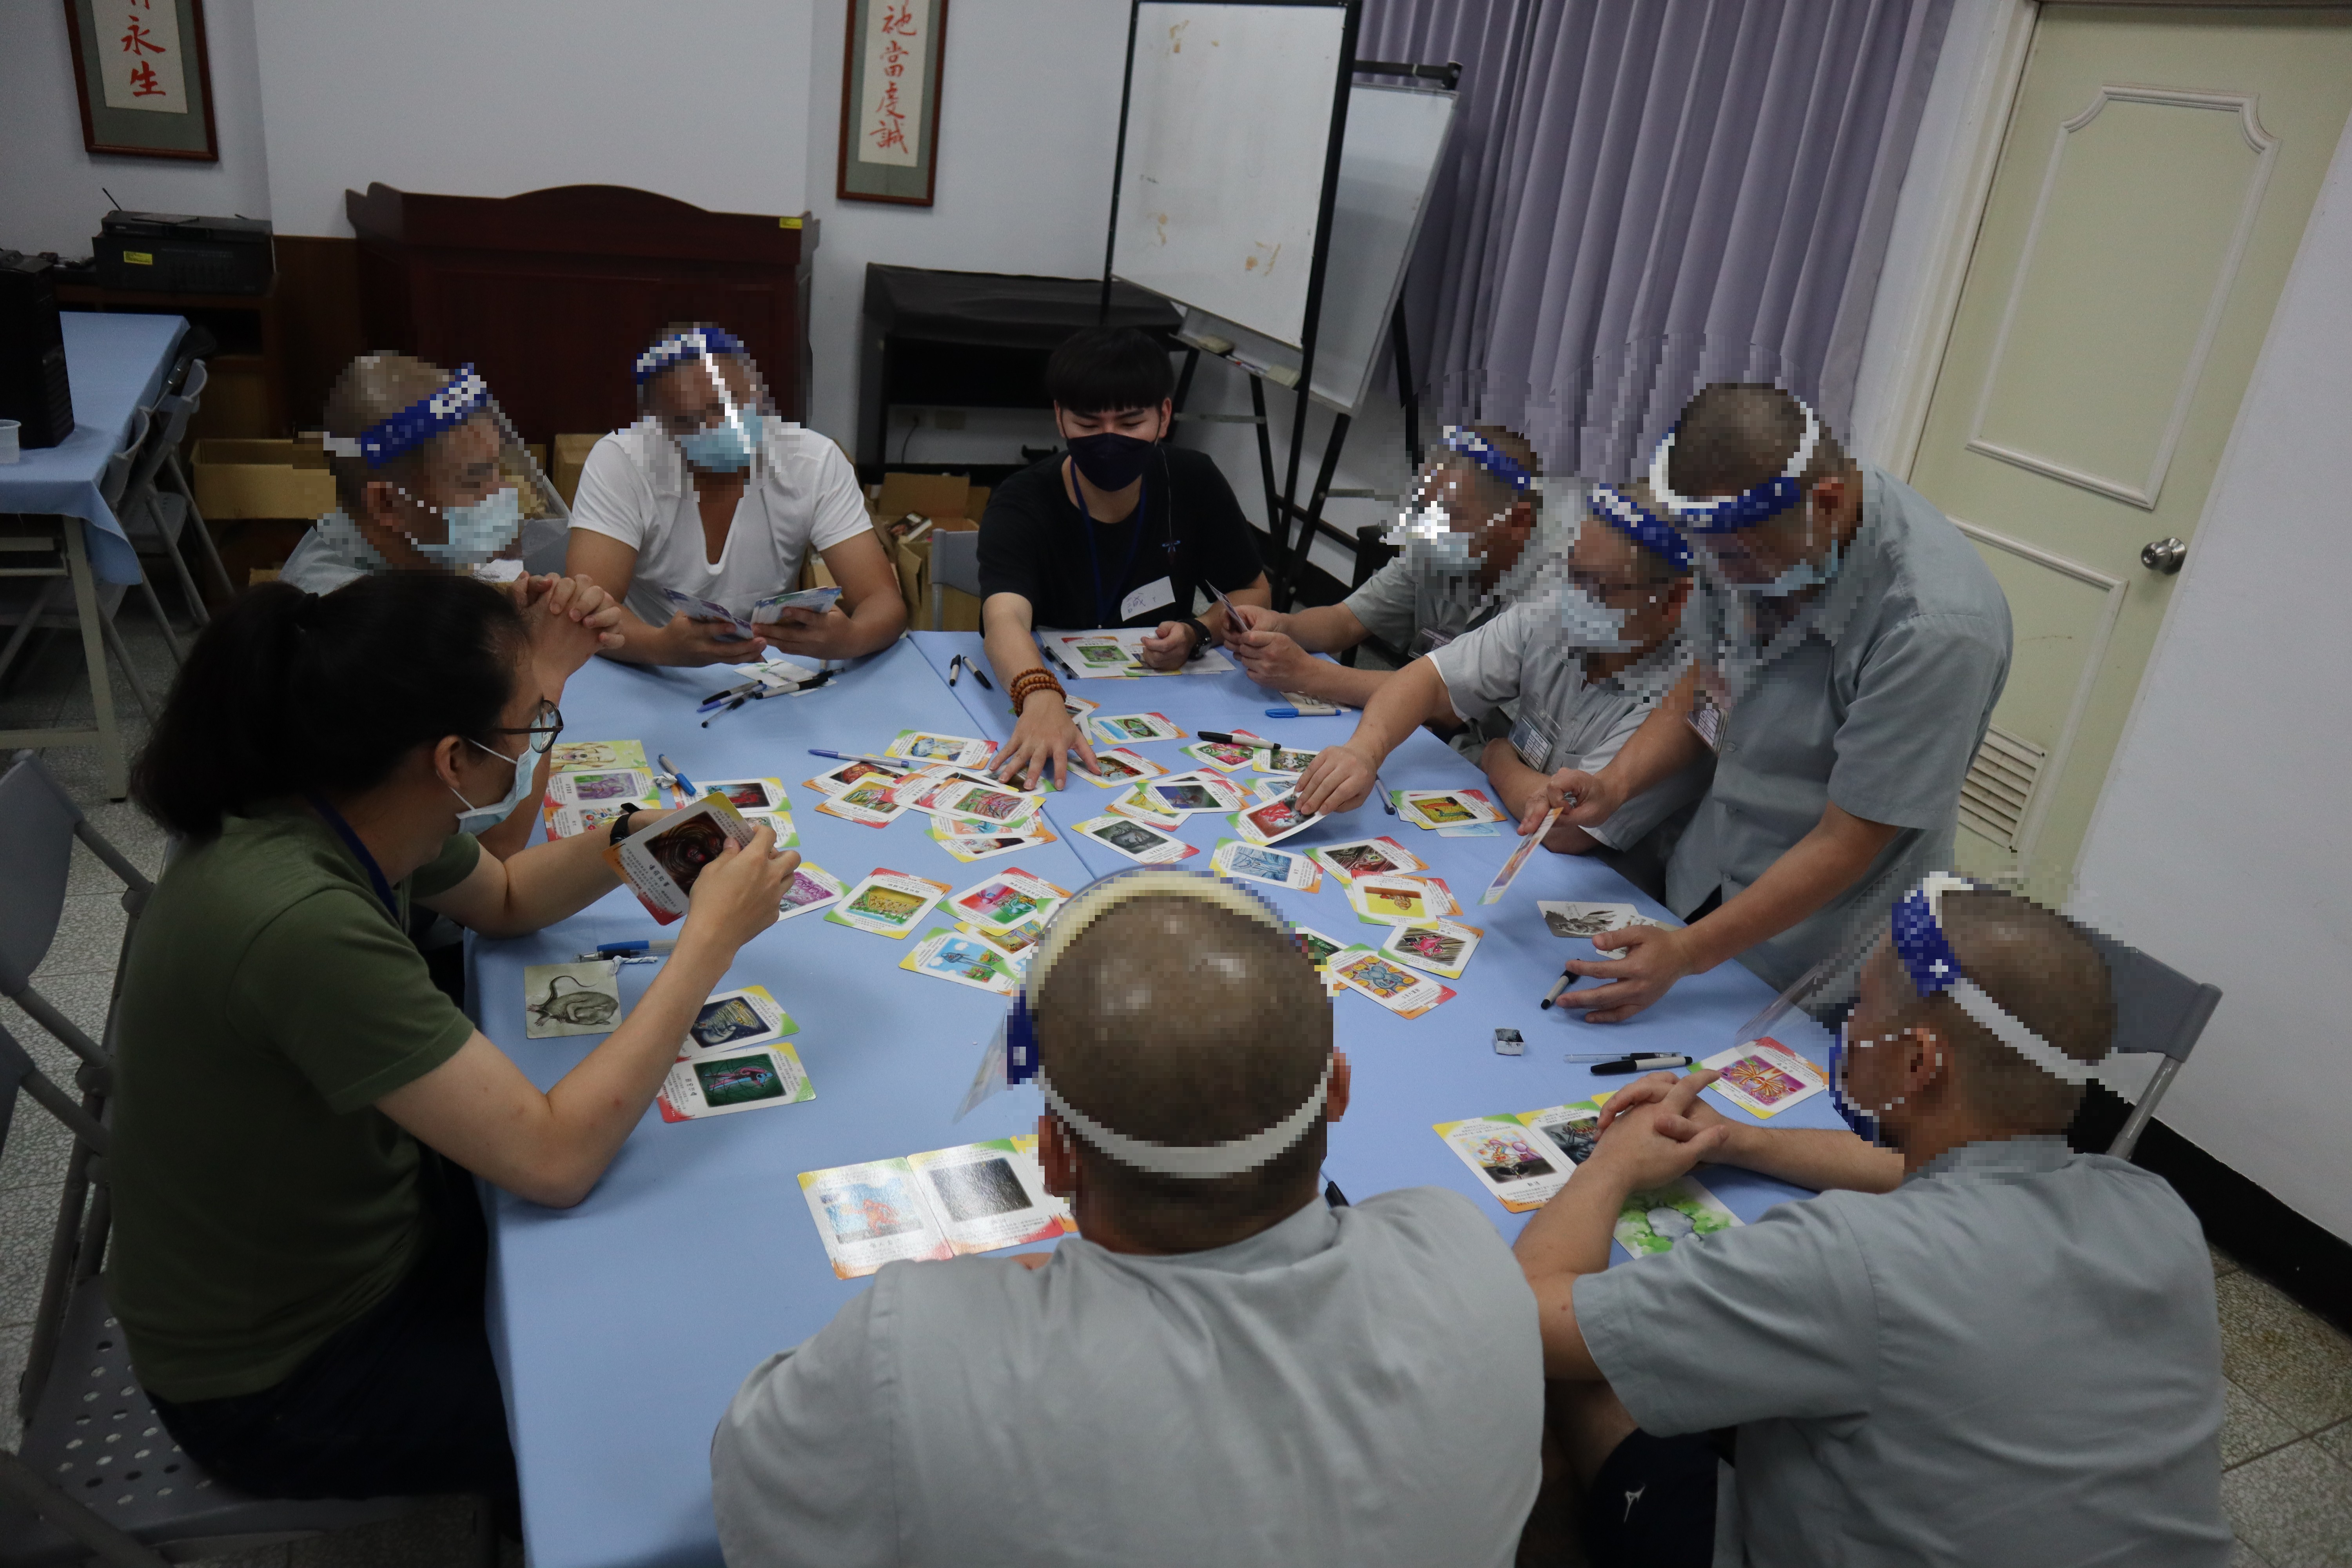 (Psychologists and inmates select cards together)